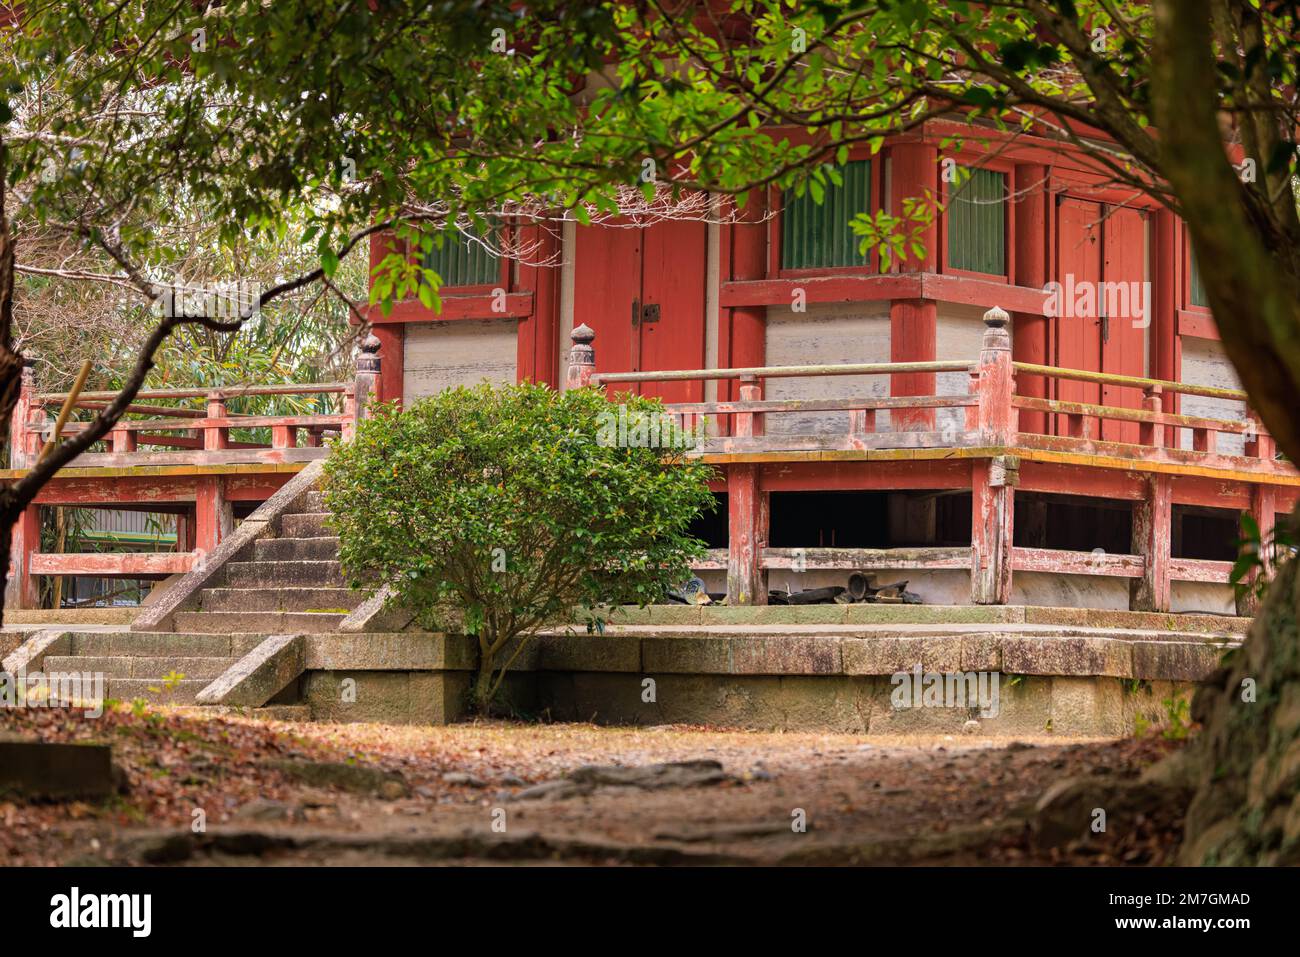 Small stairs and red building on natural grounds of Taisanji Temple Stock Photo